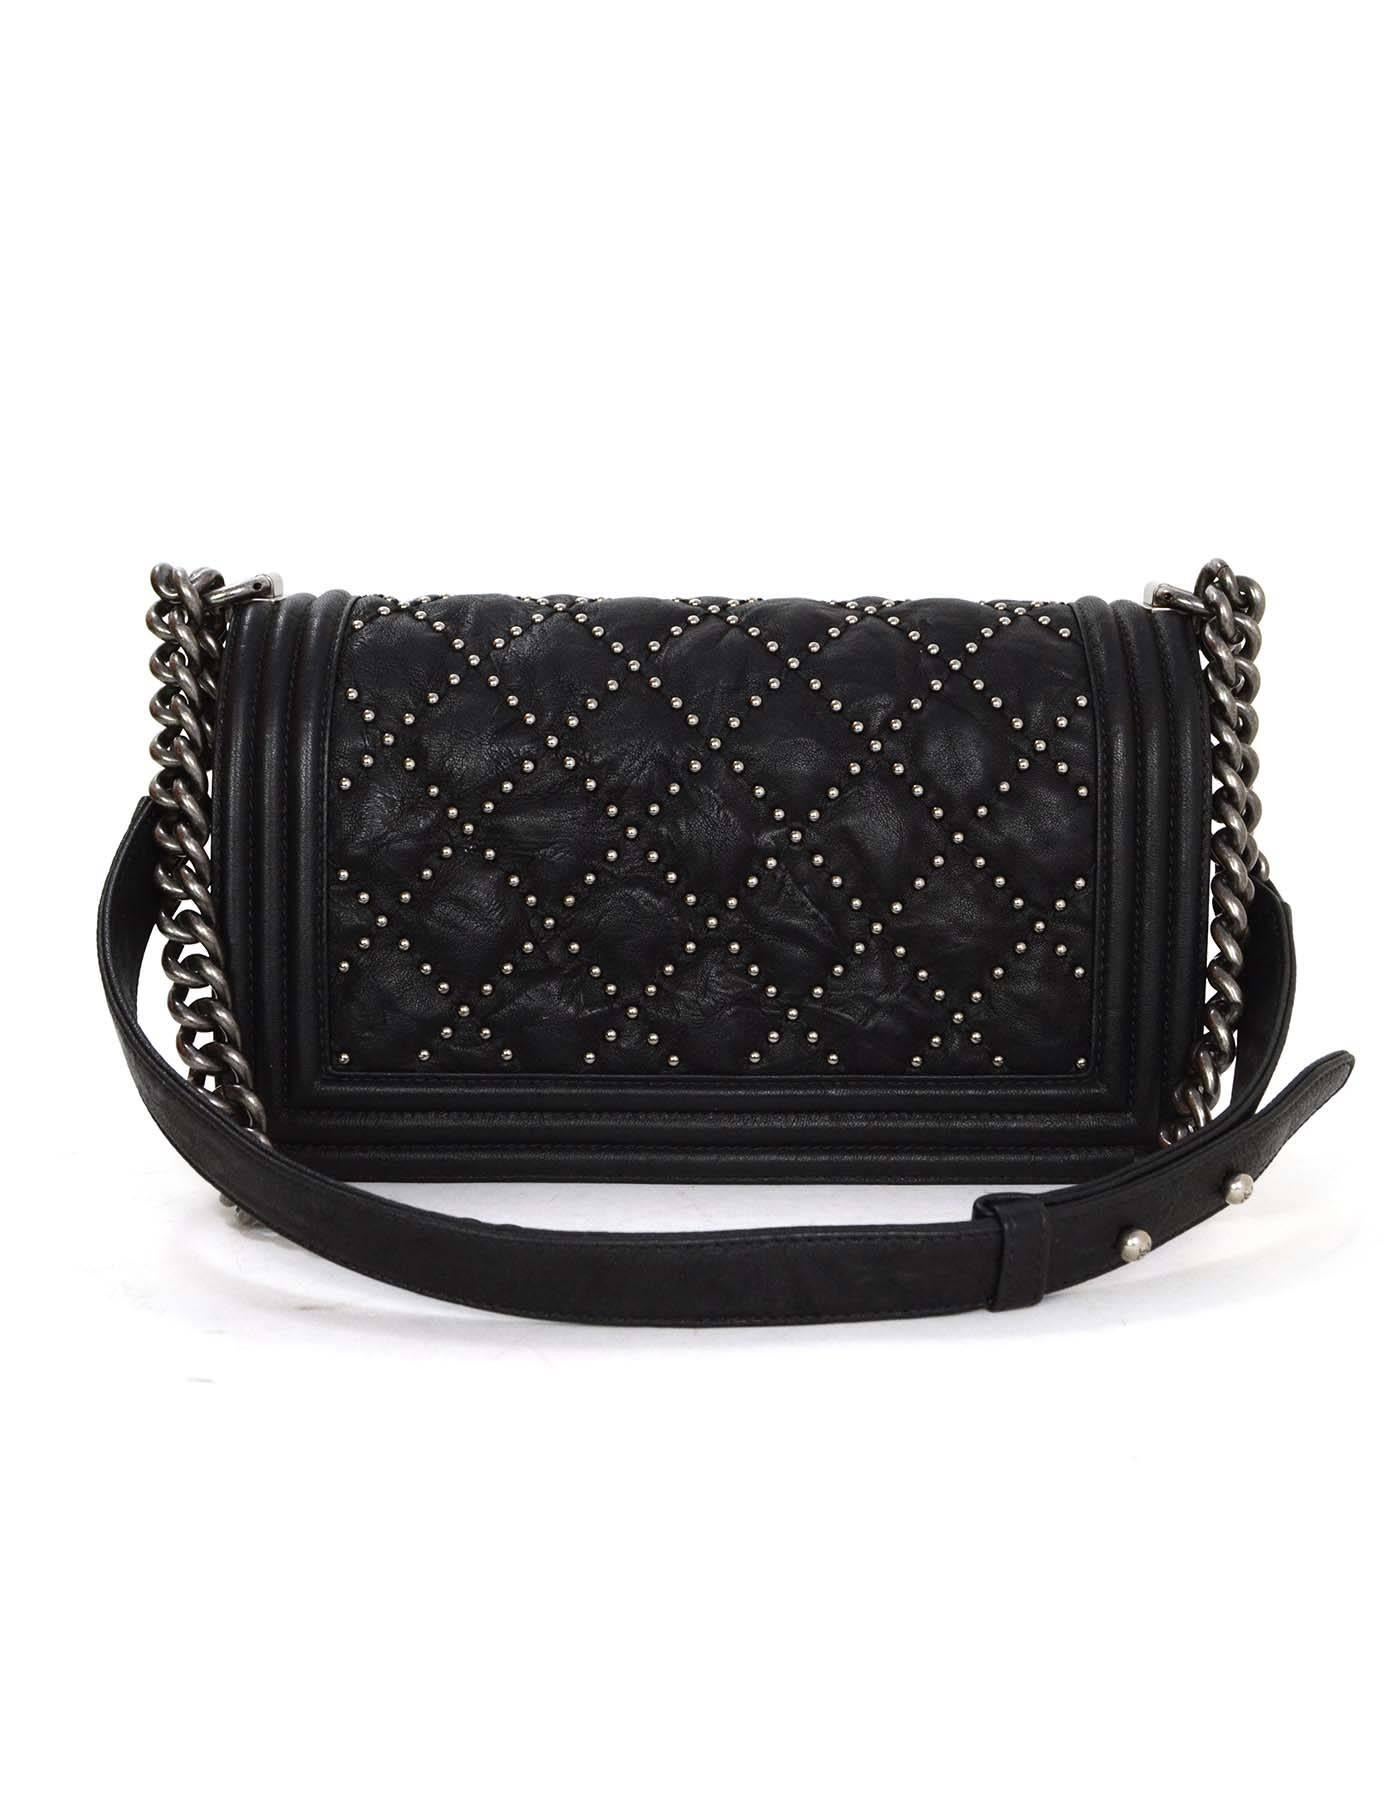 Chanel Black Distressed Leather Studded Medium Boy Bag SHW
Features adjustable shoulder strap and studded quilting throughout

Made In: Italy
Year of Production: 2015
Color: Black 
Hardware: Silvertone
Materials: Calfskin leather and metal